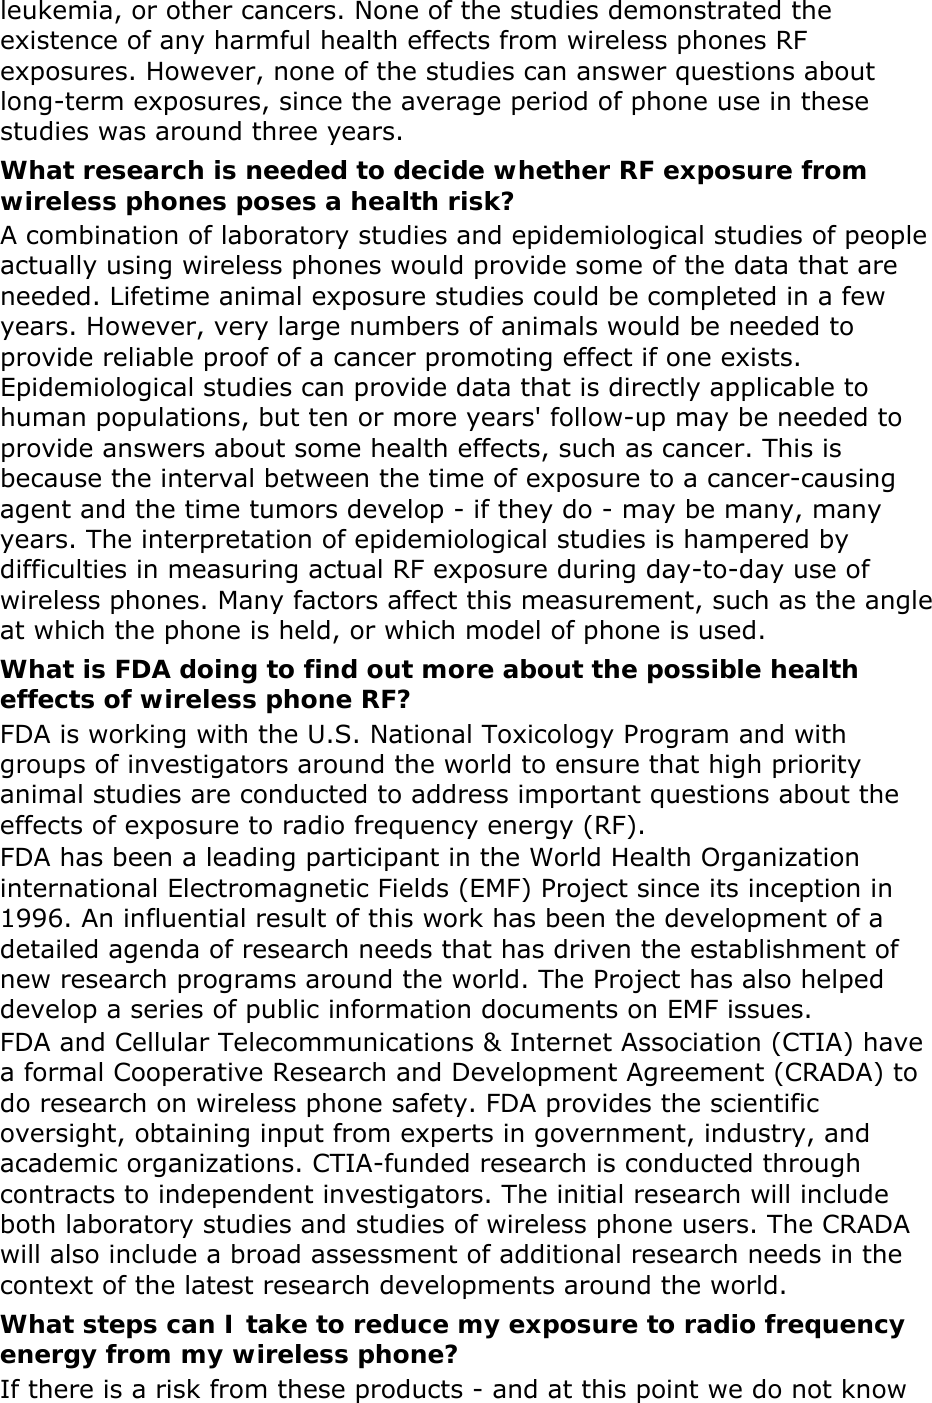 leukemia, or other cancers. None of the studies demonstrated the existence of any harmful health effects from wireless phones RF exposures. However, none of the studies can answer questions about long-term exposures, since the average period of phone use in these studies was around three years. What research is needed to decide whether RF exposure from wireless phones poses a health risk? A combination of laboratory studies and epidemiological studies of people actually using wireless phones would provide some of the data that are needed. Lifetime animal exposure studies could be completed in a few years. However, very large numbers of animals would be needed to provide reliable proof of a cancer promoting effect if one exists. Epidemiological studies can provide data that is directly applicable to human populations, but ten or more years&apos; follow-up may be needed to provide answers about some health effects, such as cancer. This is because the interval between the time of exposure to a cancer-causing agent and the time tumors develop - if they do - may be many, many years. The interpretation of epidemiological studies is hampered by difficulties in measuring actual RF exposure during day-to-day use of wireless phones. Many factors affect this measurement, such as the angle at which the phone is held, or which model of phone is used. What is FDA doing to find out more about the possible health effects of wireless phone RF? FDA is working with the U.S. National Toxicology Program and with groups of investigators around the world to ensure that high priority animal studies are conducted to address important questions about the effects of exposure to radio frequency energy (RF). FDA has been a leading participant in the World Health Organization international Electromagnetic Fields (EMF) Project since its inception in 1996. An influential result of this work has been the development of a detailed agenda of research needs that has driven the establishment of new research programs around the world. The Project has also helped develop a series of public information documents on EMF issues. FDA and Cellular Telecommunications &amp; Internet Association (CTIA) have a formal Cooperative Research and Development Agreement (CRADA) to do research on wireless phone safety. FDA provides the scientific oversight, obtaining input from experts in government, industry, and academic organizations. CTIA-funded research is conducted through contracts to independent investigators. The initial research will include both laboratory studies and studies of wireless phone users. The CRADA will also include a broad assessment of additional research needs in the context of the latest research developments around the world. What steps can I take to reduce my exposure to radio frequency energy from my wireless phone? If there is a risk from these products - and at this point we do not know 